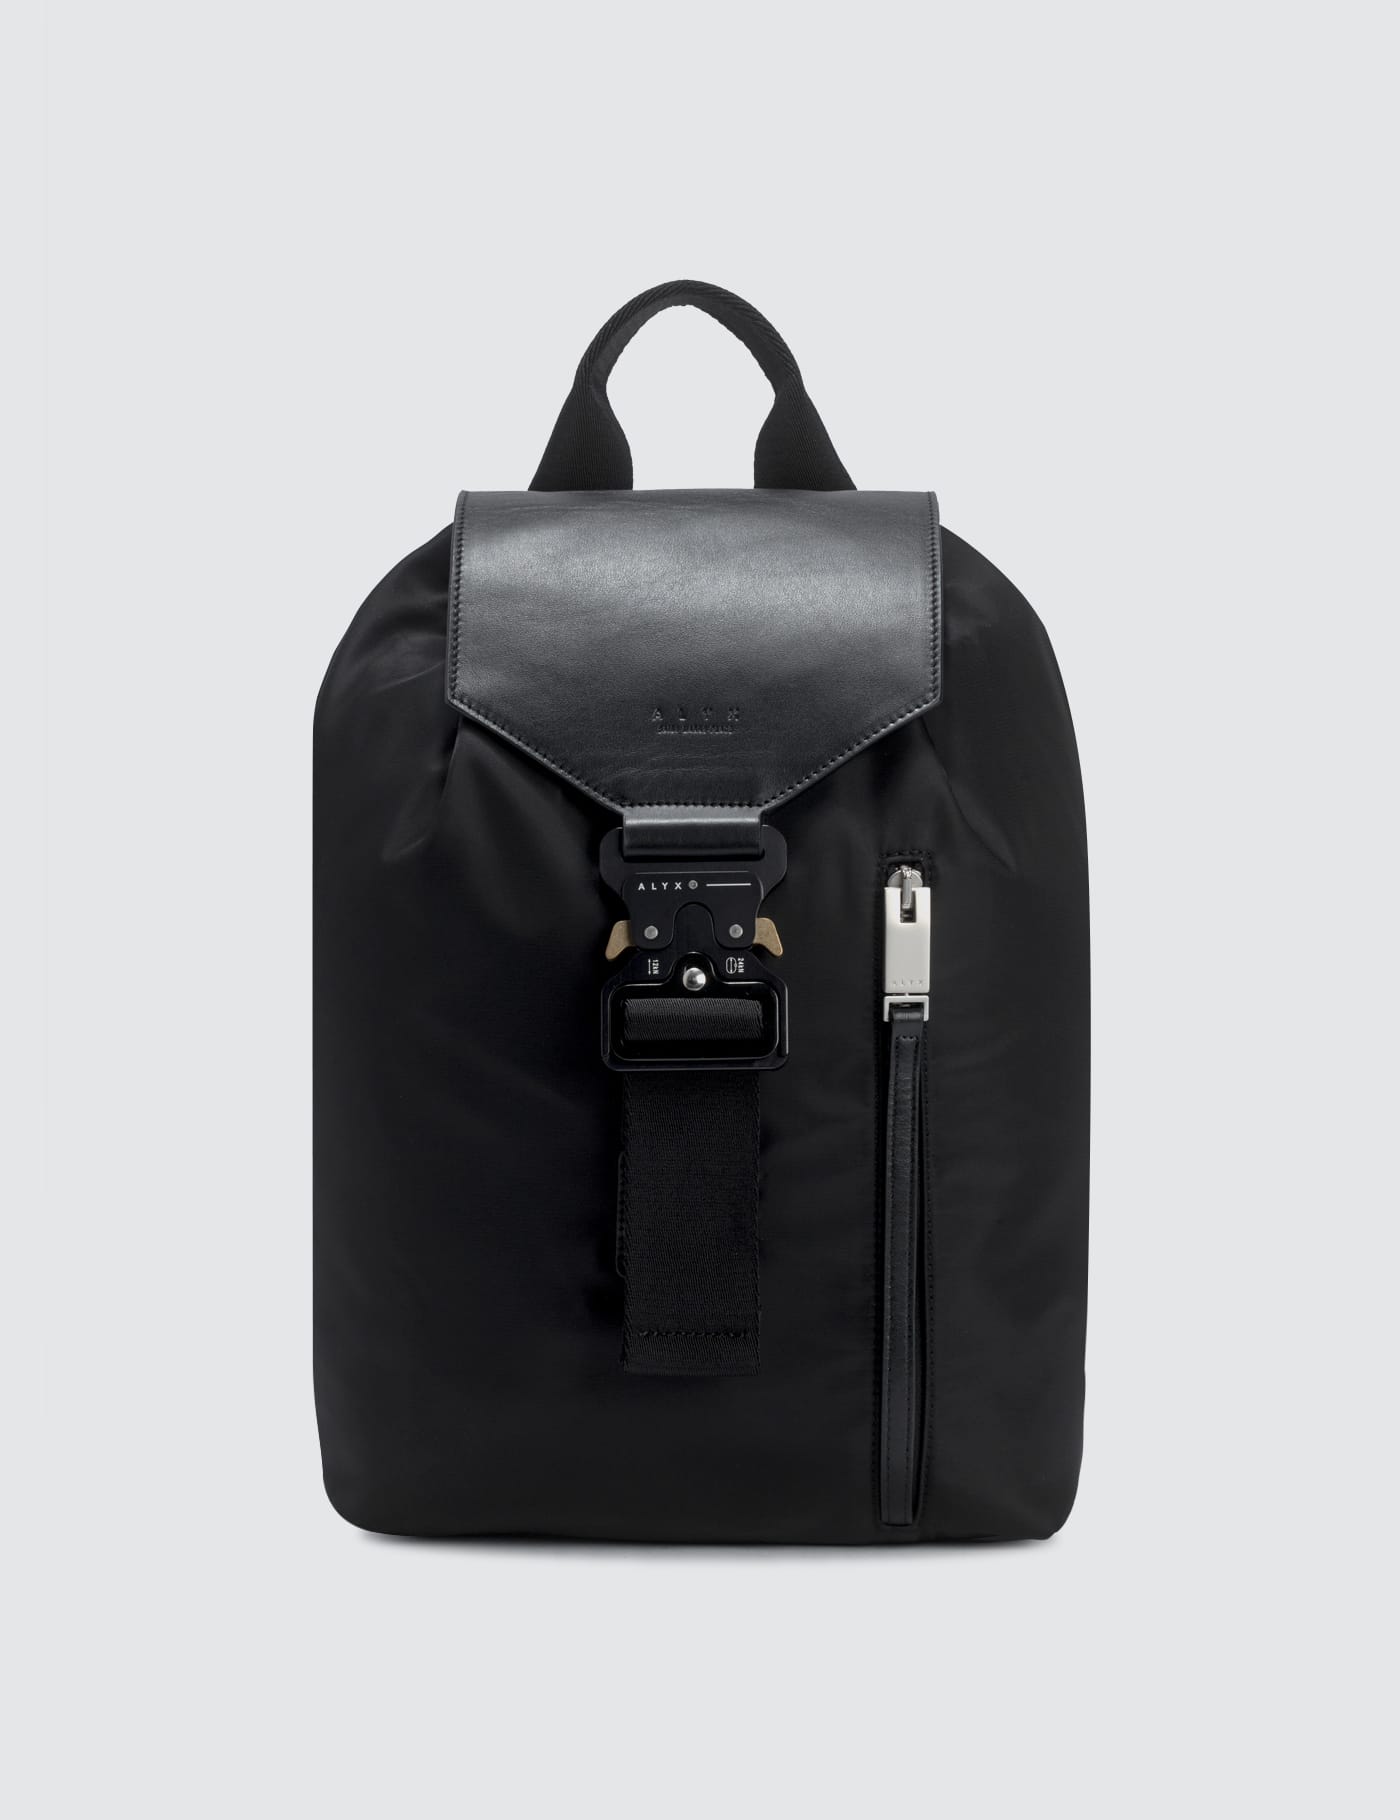 1017 ALYX 9SM - Tank Backpack with Leather Flap | HBX - Globally